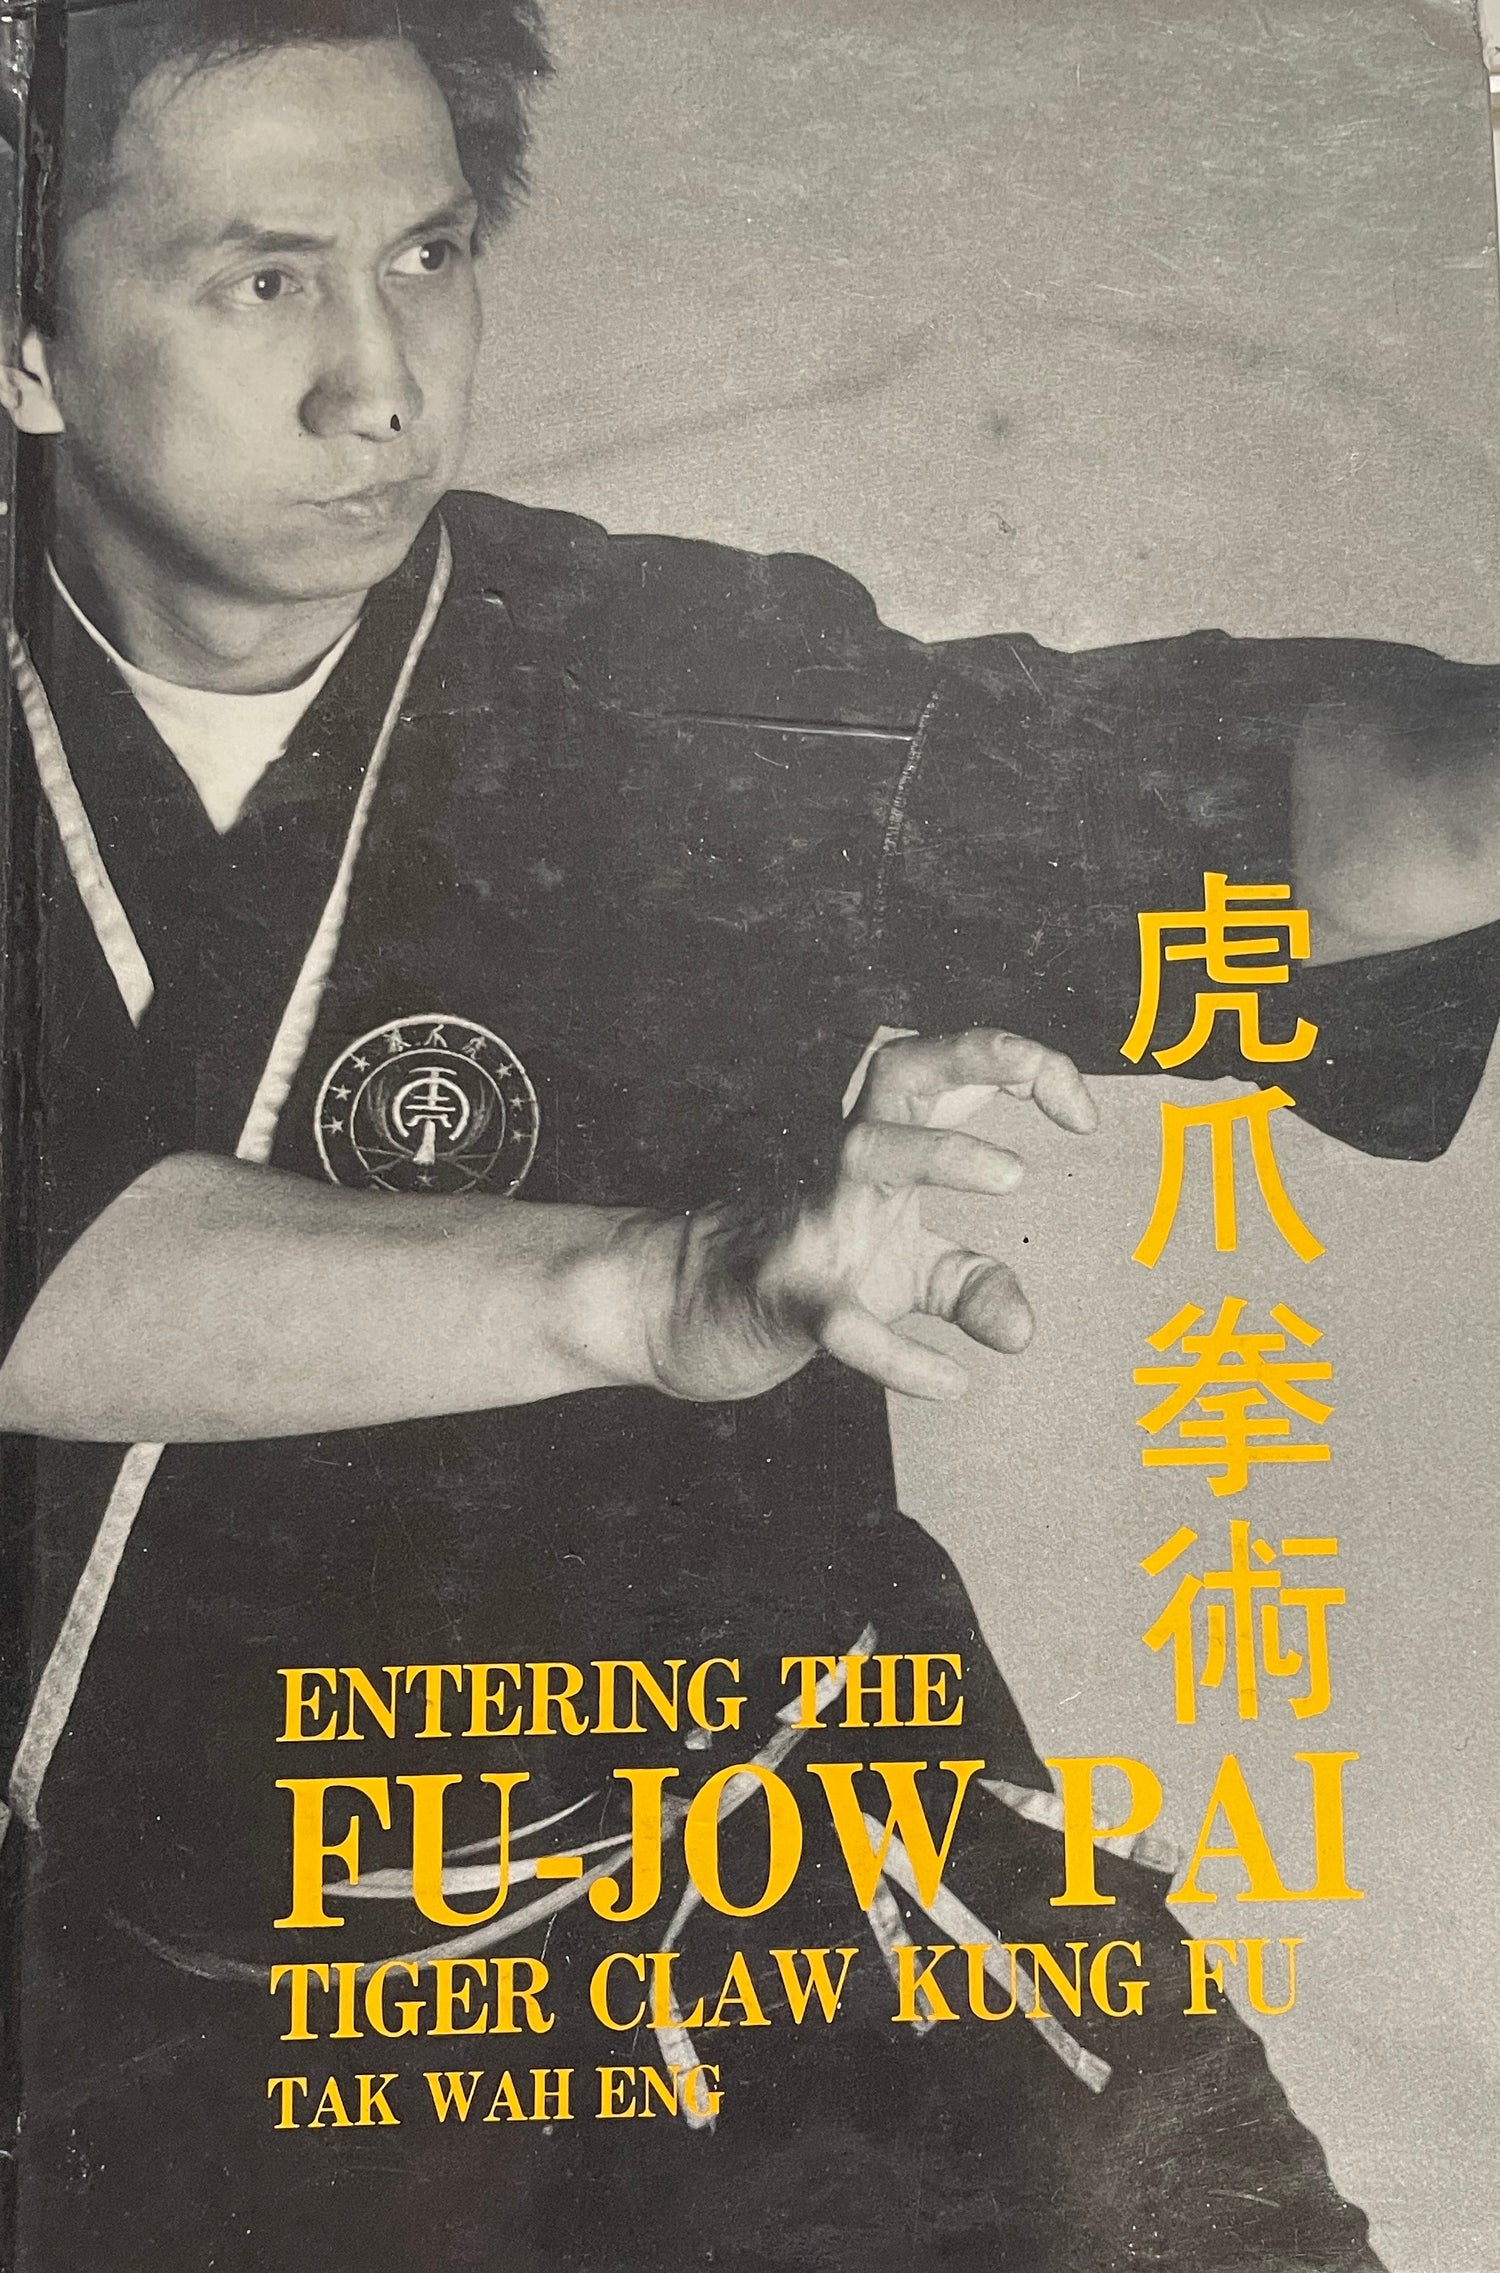 Entering the Fu-jow pai Tiger claw kung fu Book by Tak Wah Eng (中古品)